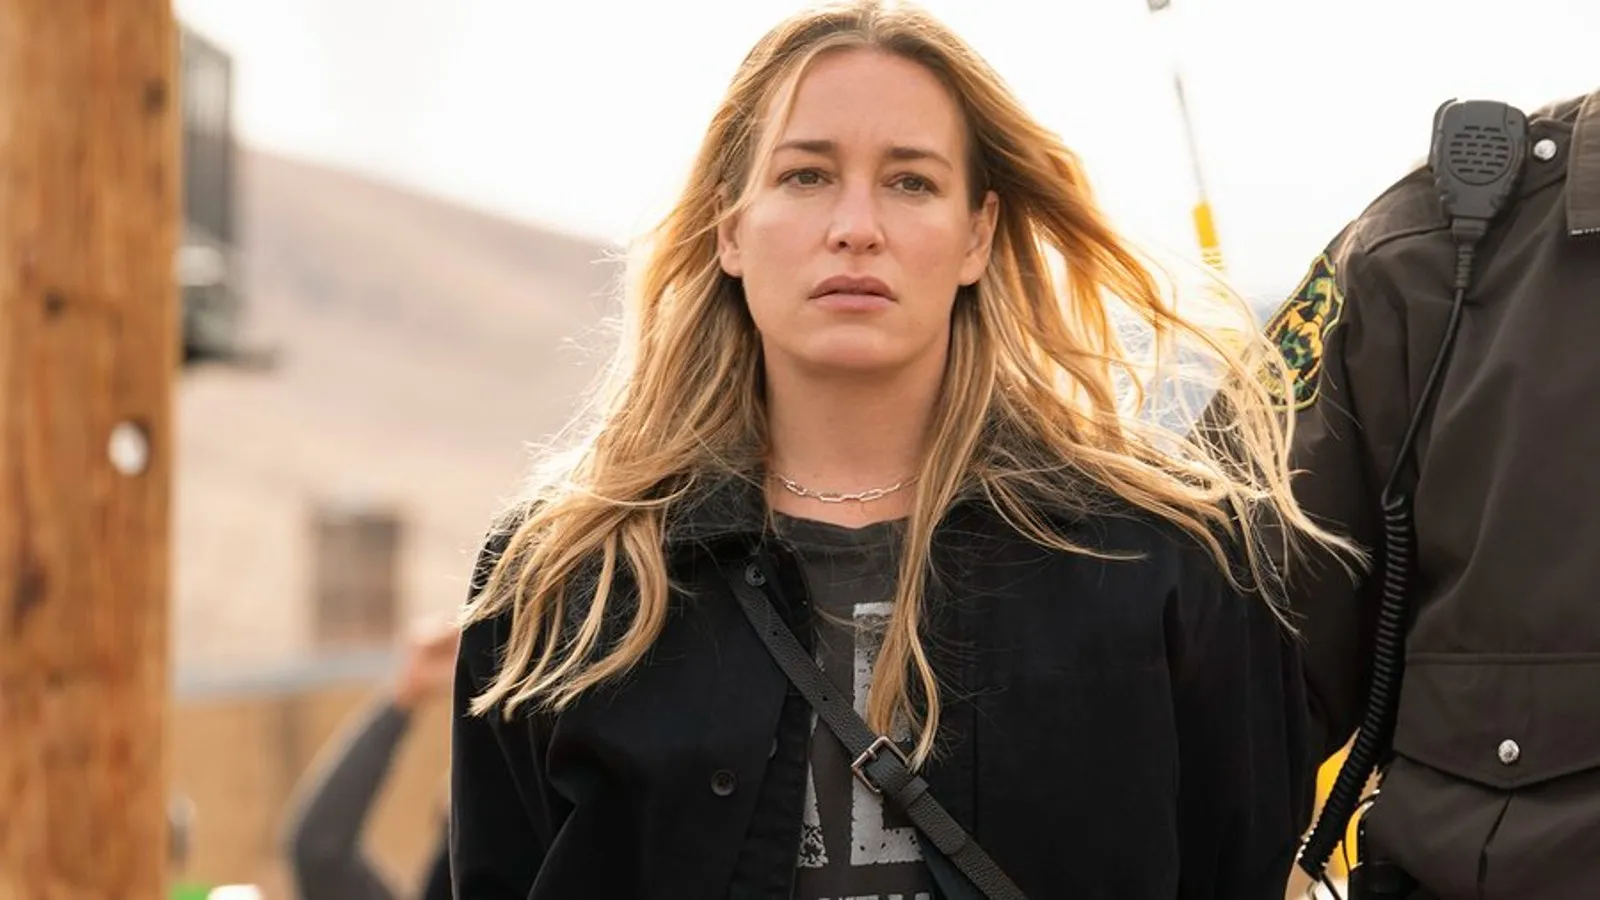 Latest ‘Yellowstone’ News: Piper Perabo teases trouble on the horizon after that Dutton kiss as Taylor Sheridan explains the devastating catalyst for ‘1923′